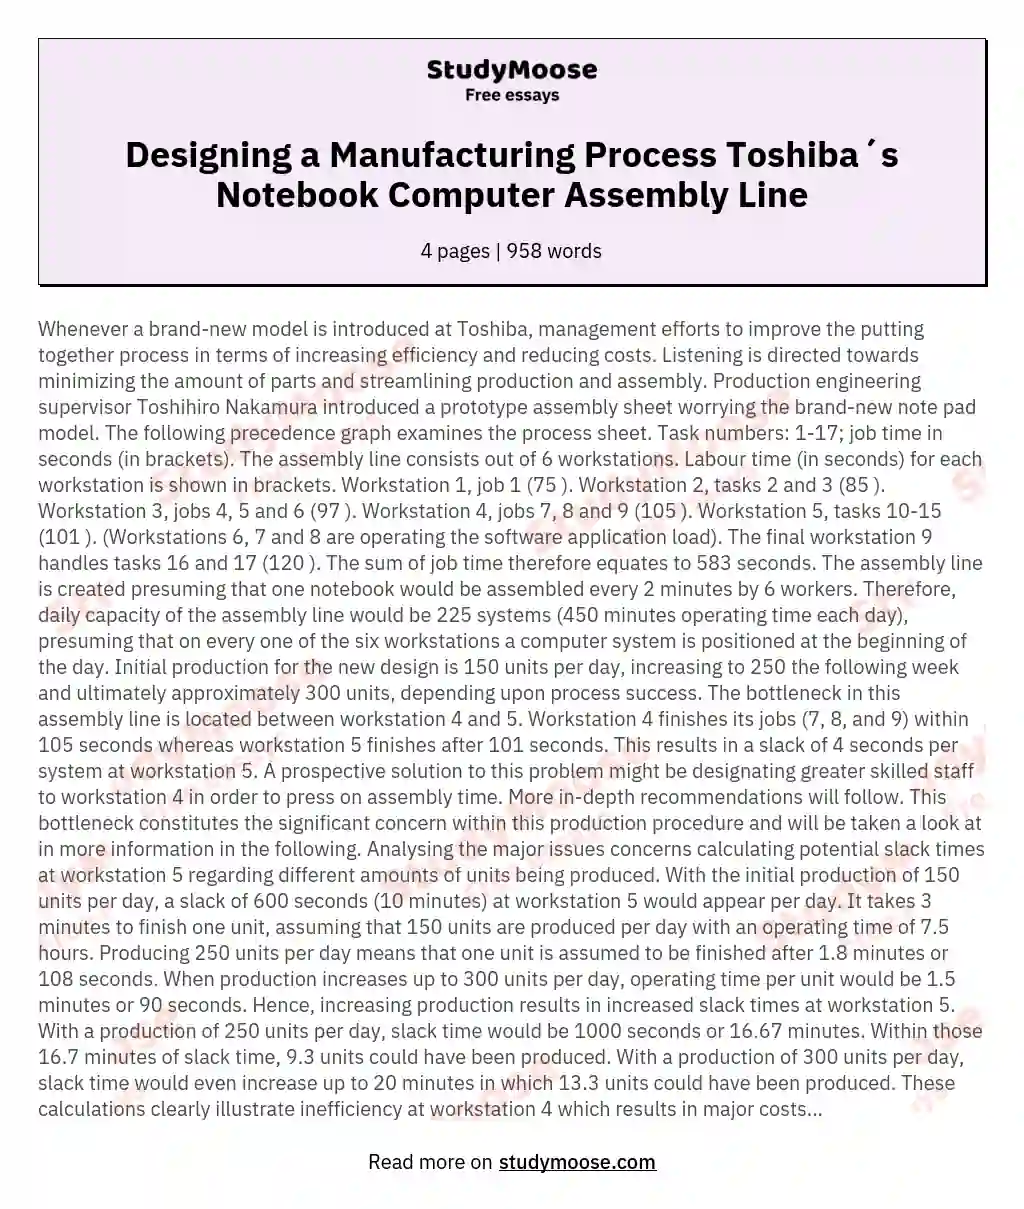 Designing a Manufacturing Process Toshiba´s Notebook Computer Assembly Line essay